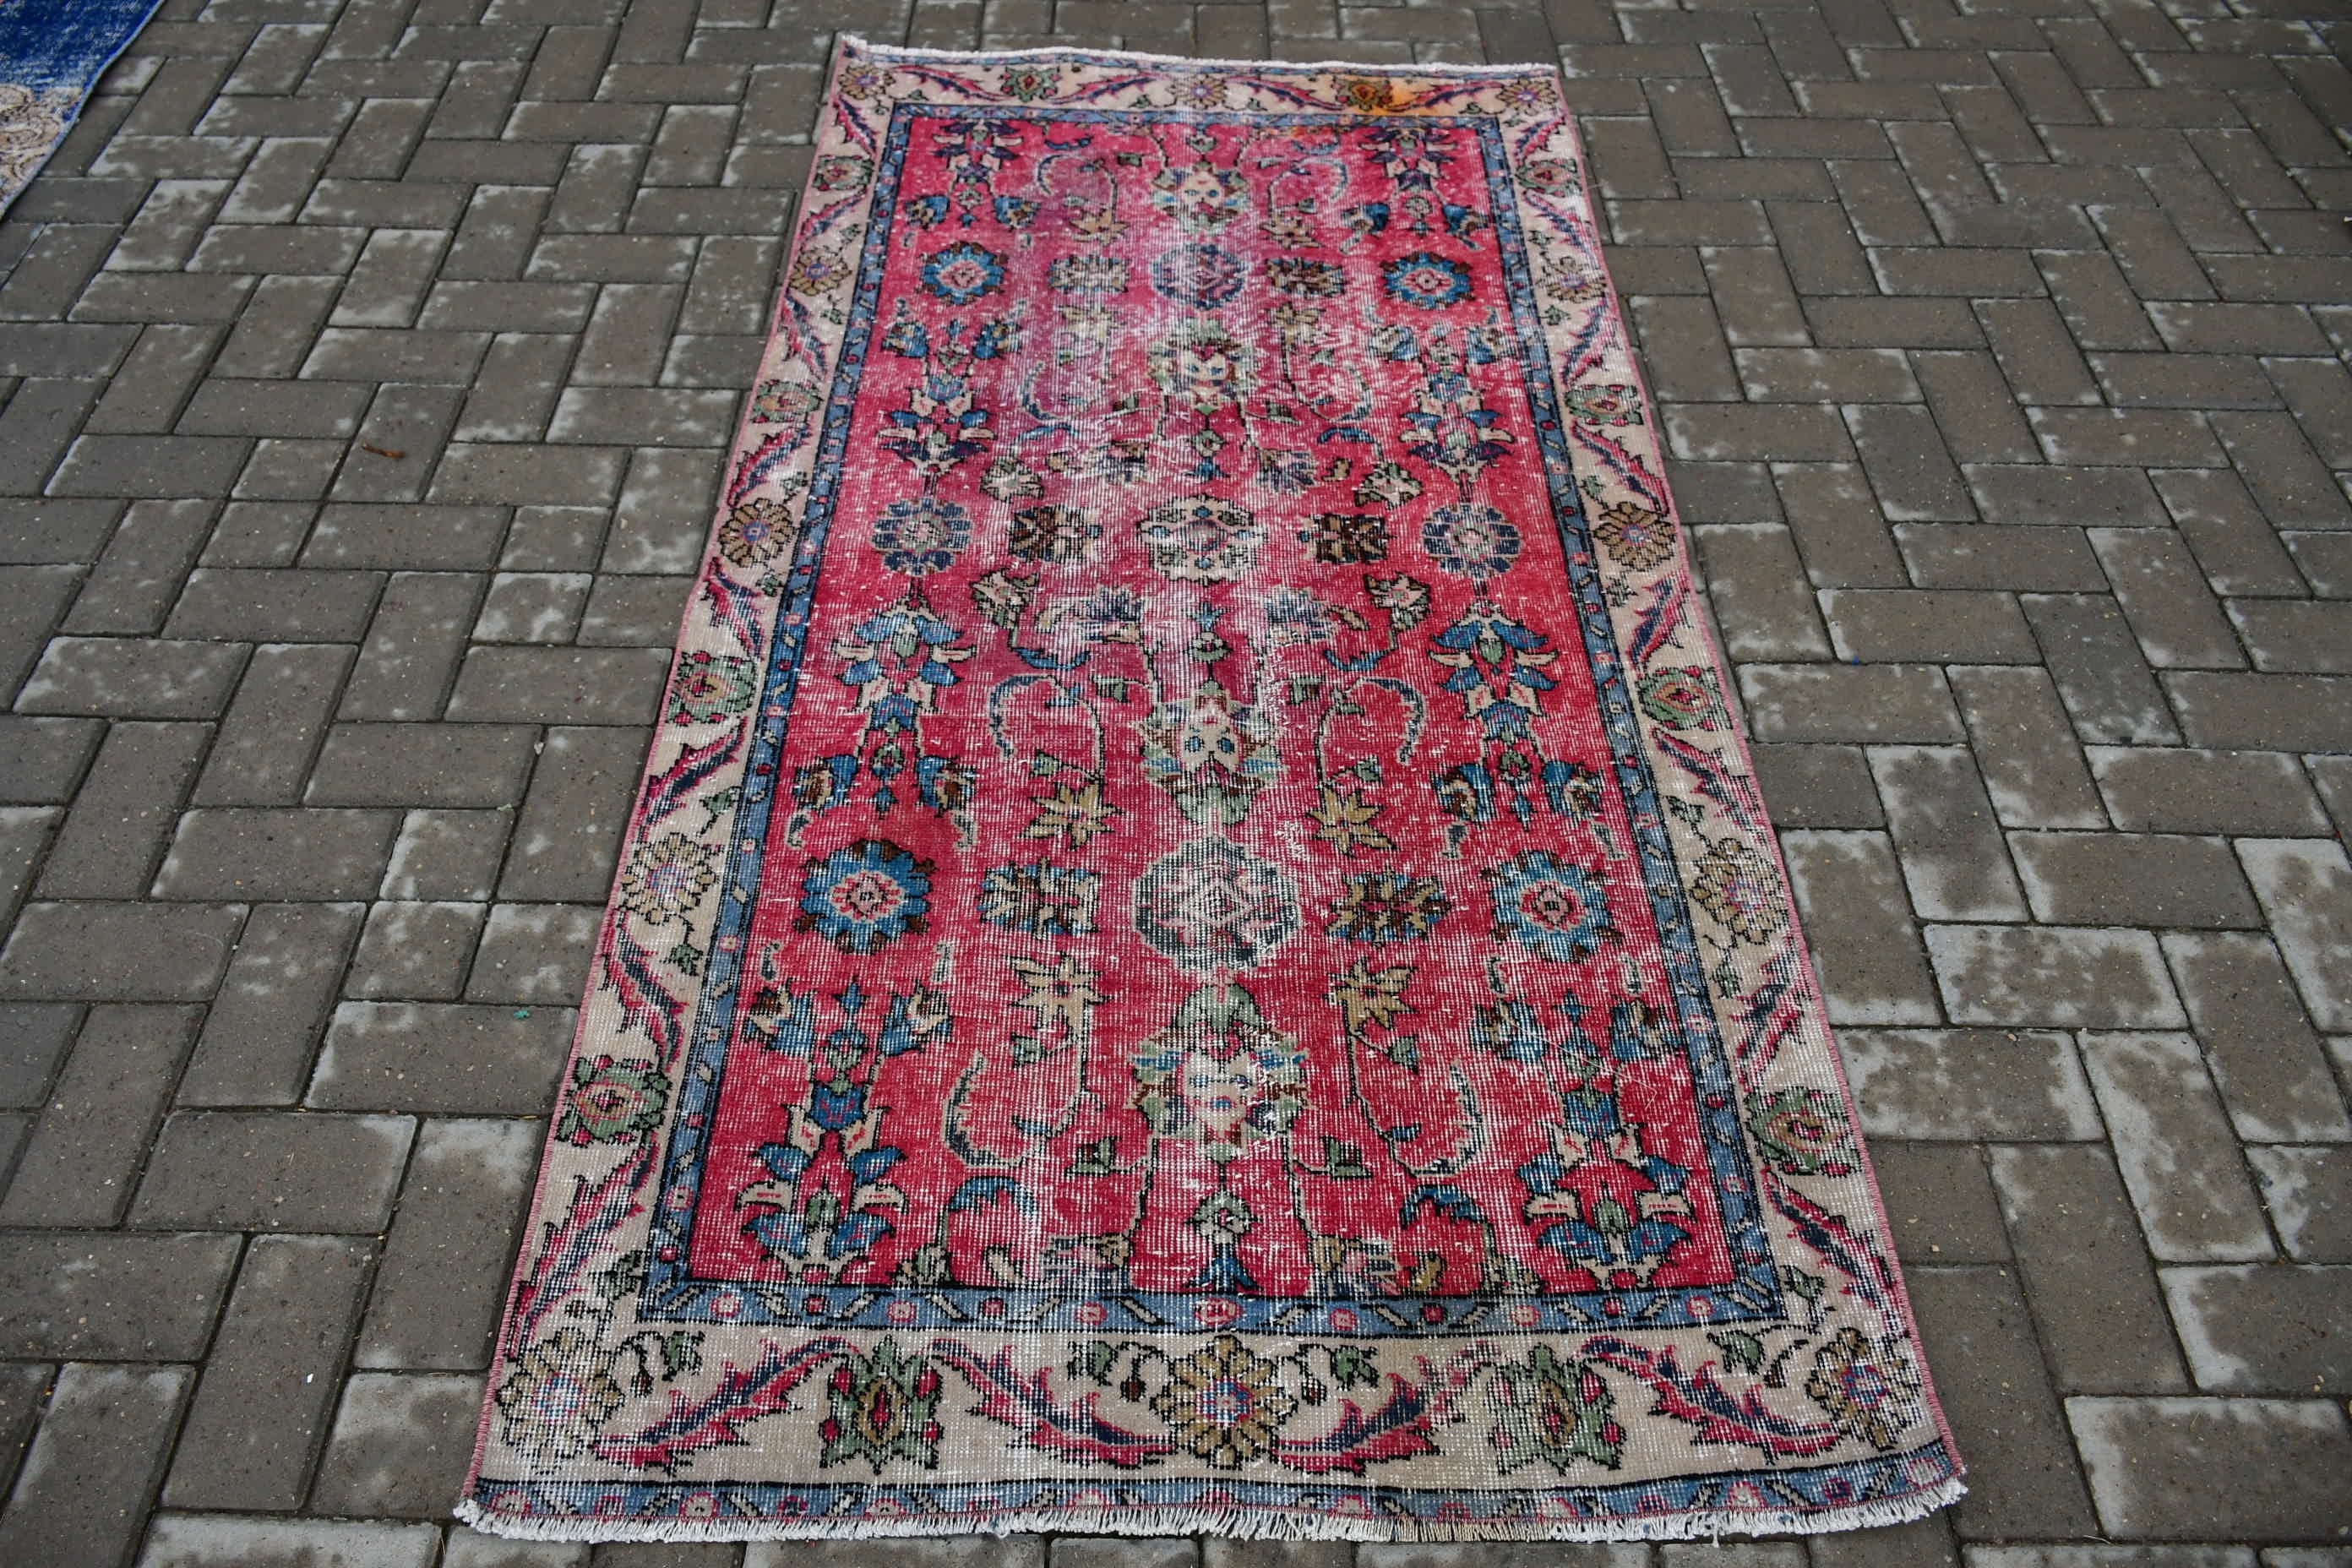 Kitchen Rug, 3.3x6.3 ft Accent Rugs, Nursery Rug, Boho Rug, Vintage Rugs, Oriental Rug, Turkish Rug, Rugs for Kitchen, Red Kitchen Rugs